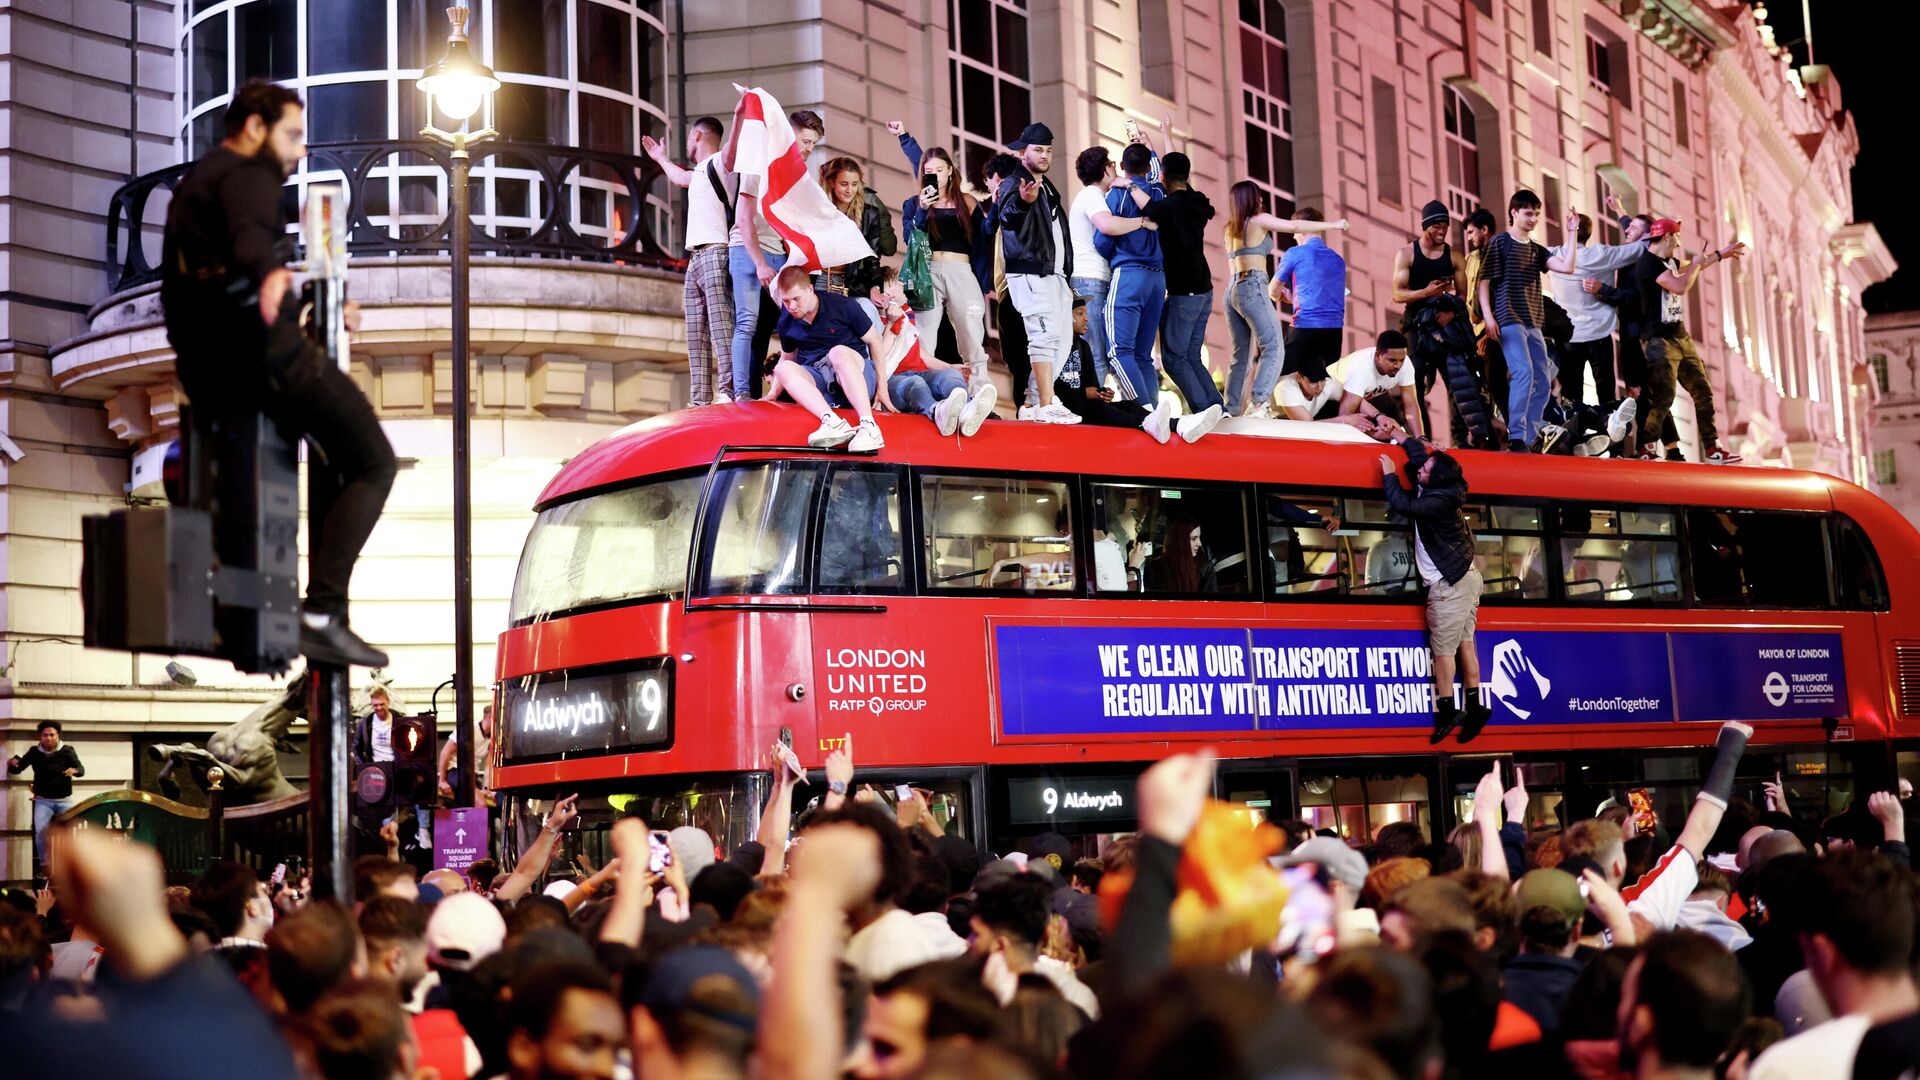 FILE PHOTO: Soccer Football - Euro 2020 - Fans gather for England v Denmark - Piccadilly Circus, London, Britain - July 7, 2021 England fans celebrate after the match REUTERS/Henry Nicholls/File Photo - РИА Новости, 1920, 09.07.2021